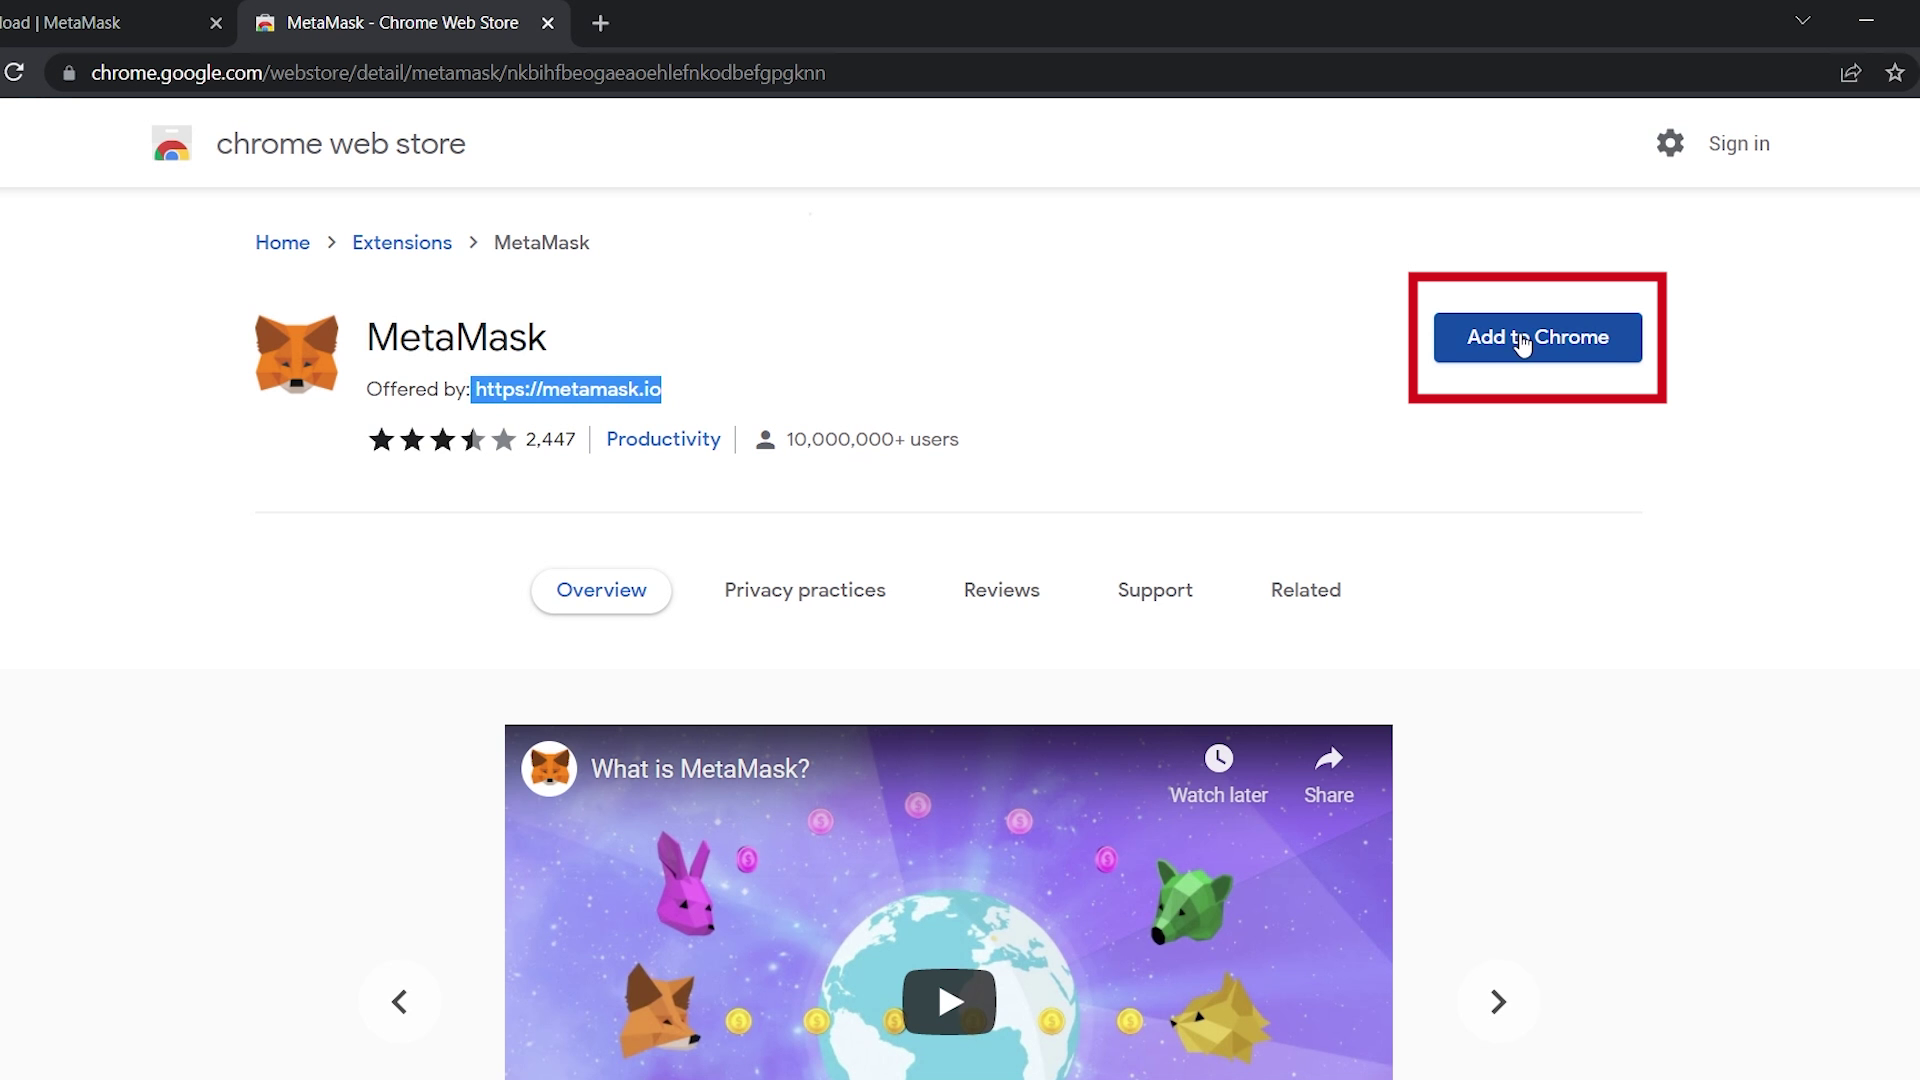 Download MetaMask As Chrome Extension